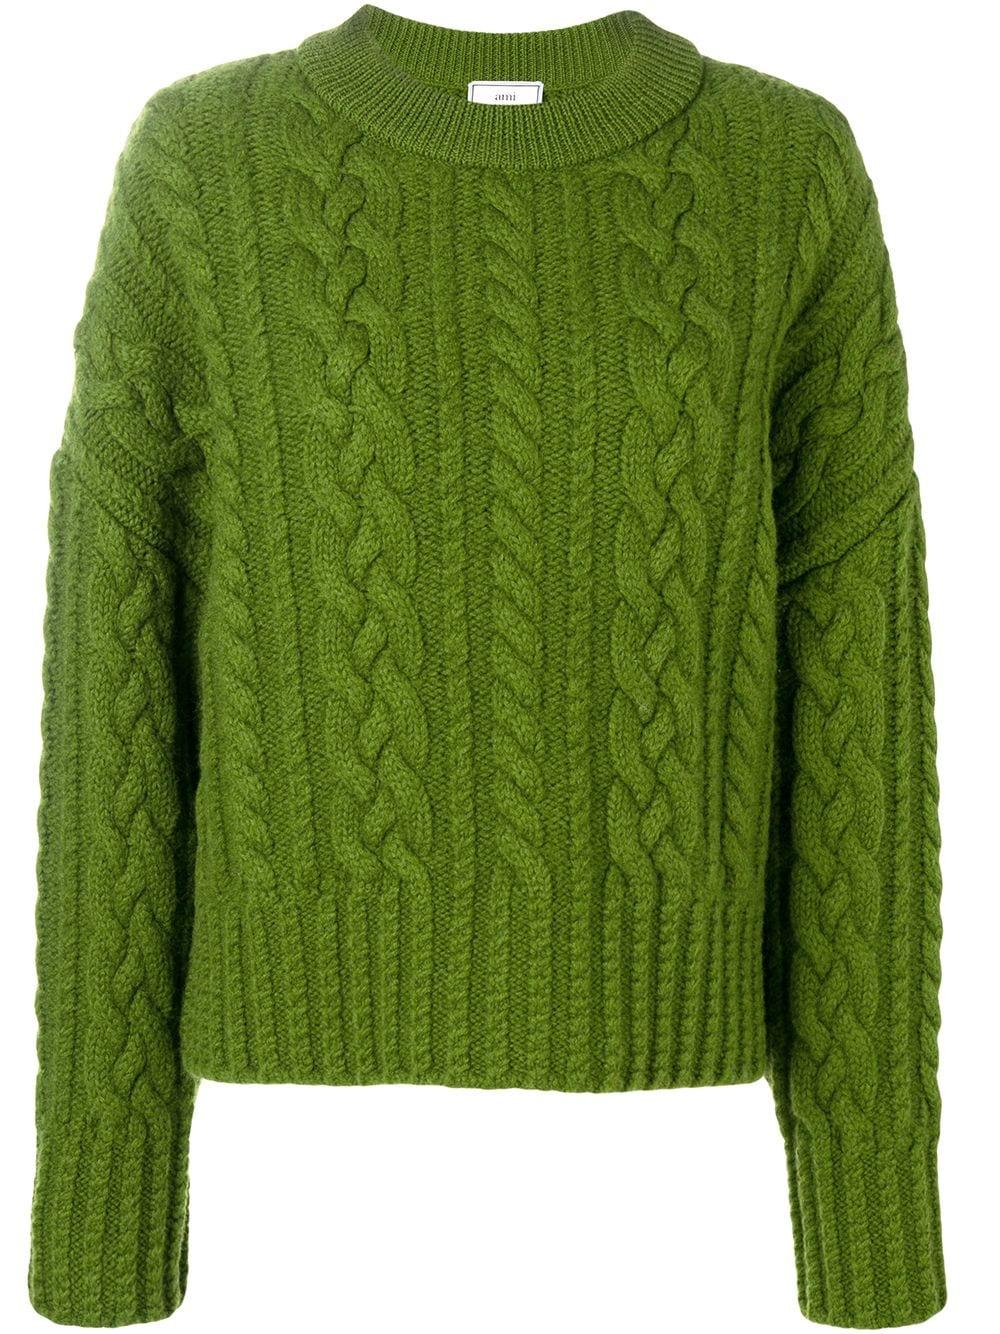 AMI Wool Crew Neck Cable Knit Oversize Sweater in Green - Lyst